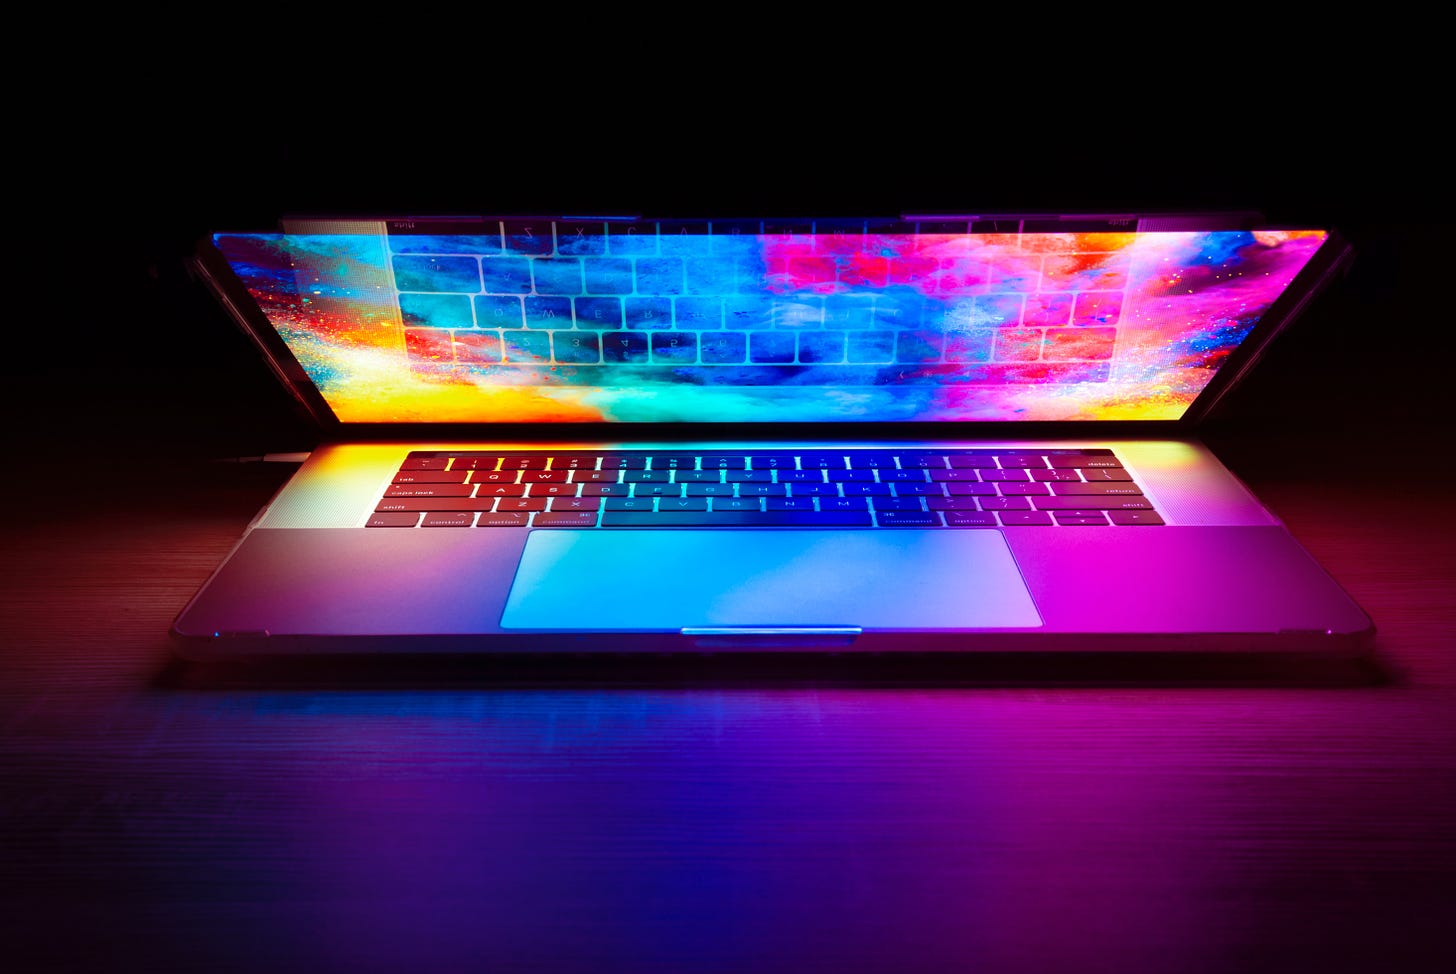 Photo of a half-opened laptop with the screen showing a rainbow-colored explosion. Joshua Woroniecki / Unsplash